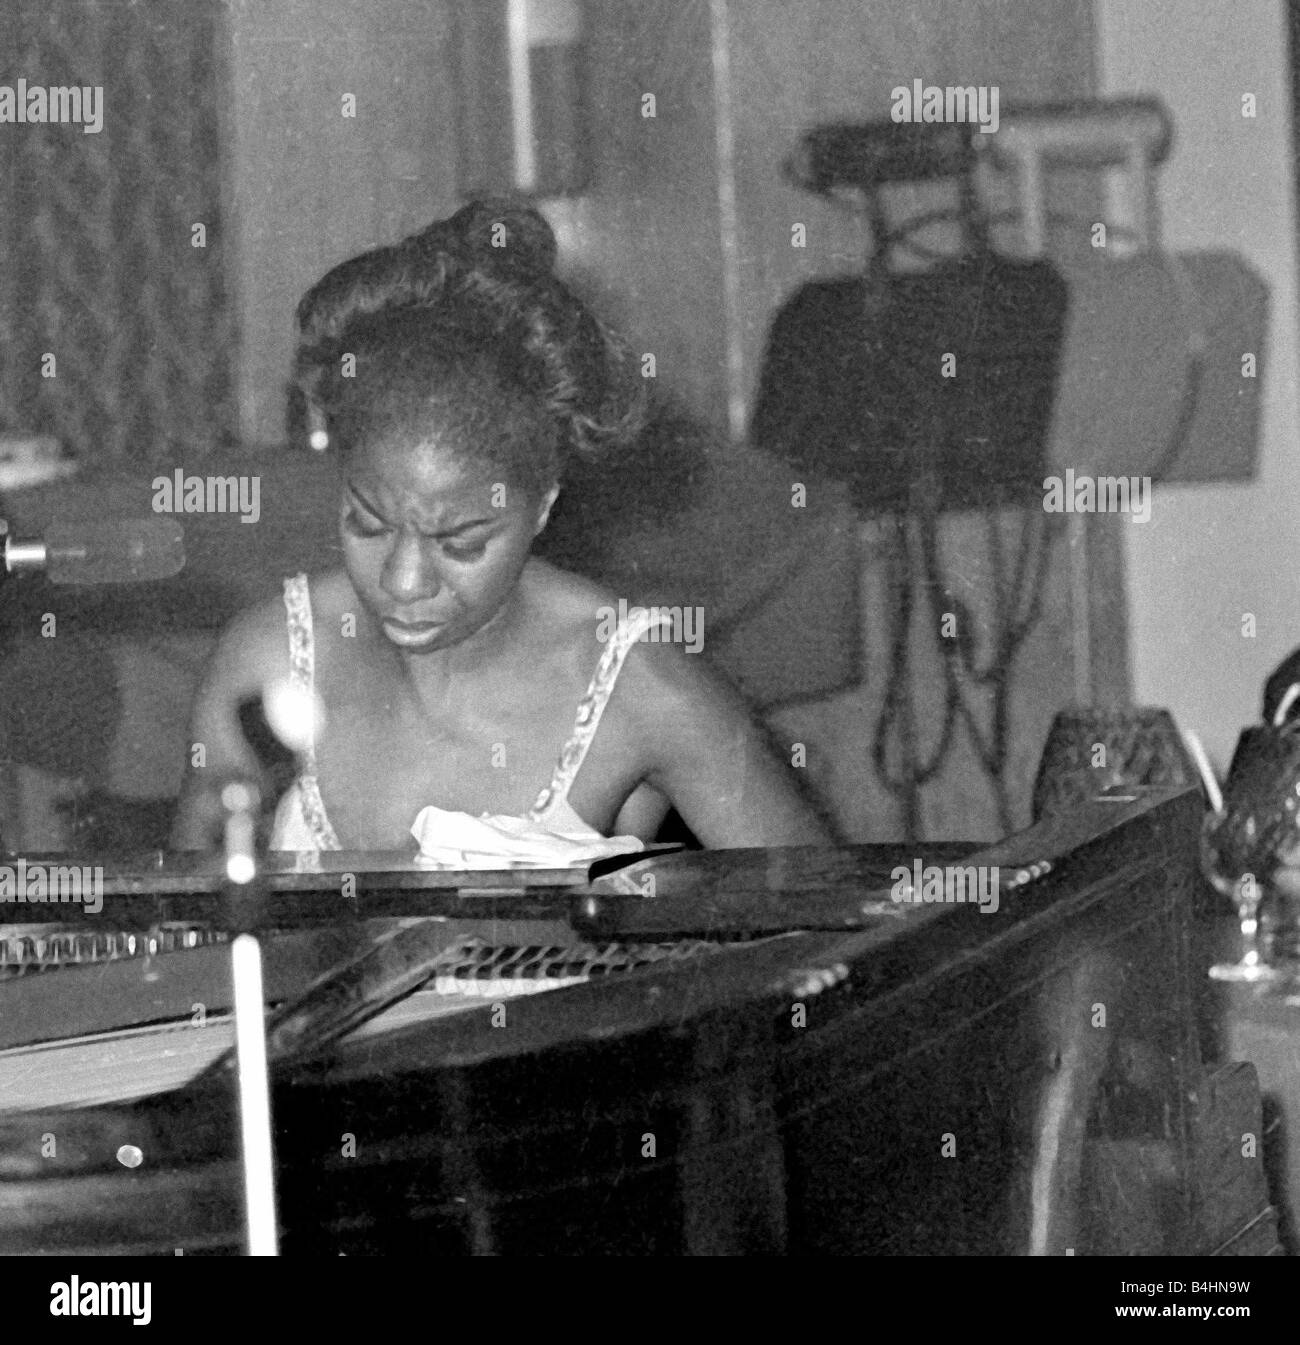 Nina Simone June 1965 Jazz singer Pictured preforming at Annies Club on stage playing piano Eunice Kathleen Waymon Nina Simone singer and songwriter born Tryon North Carolina 21 February 1933 married 1958 Don Ross marriage dissolved 1961 Andrew Stroud one daughter marriage dissolved 1971 died Carry le Rouet France 21 April 2003 She adopted the name Nina Simone Nina meaning little one came from a Hispanic boyfriend and Simone was from the French actress Simone Signoret Jazz Singers 1960s Mirrorpix Stock Photo